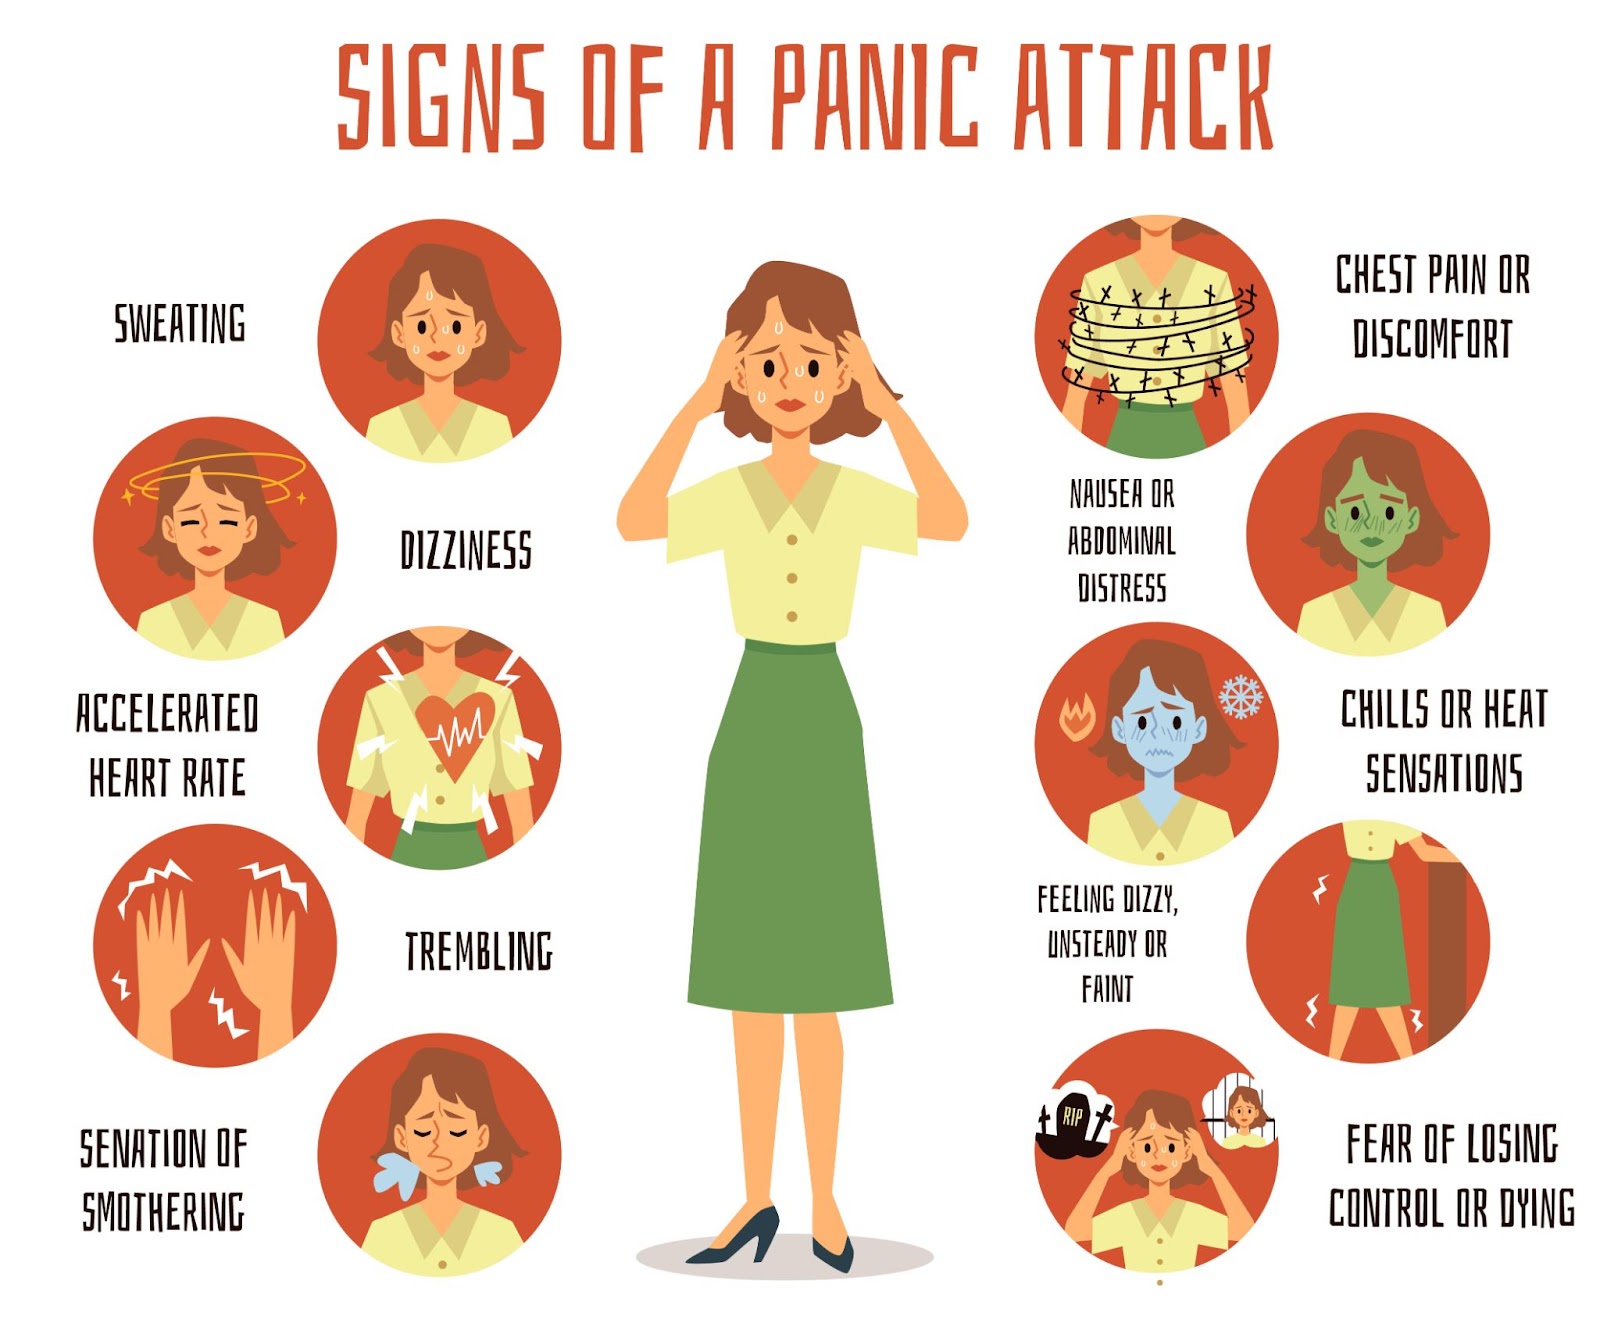 Signs of a panic attack chart